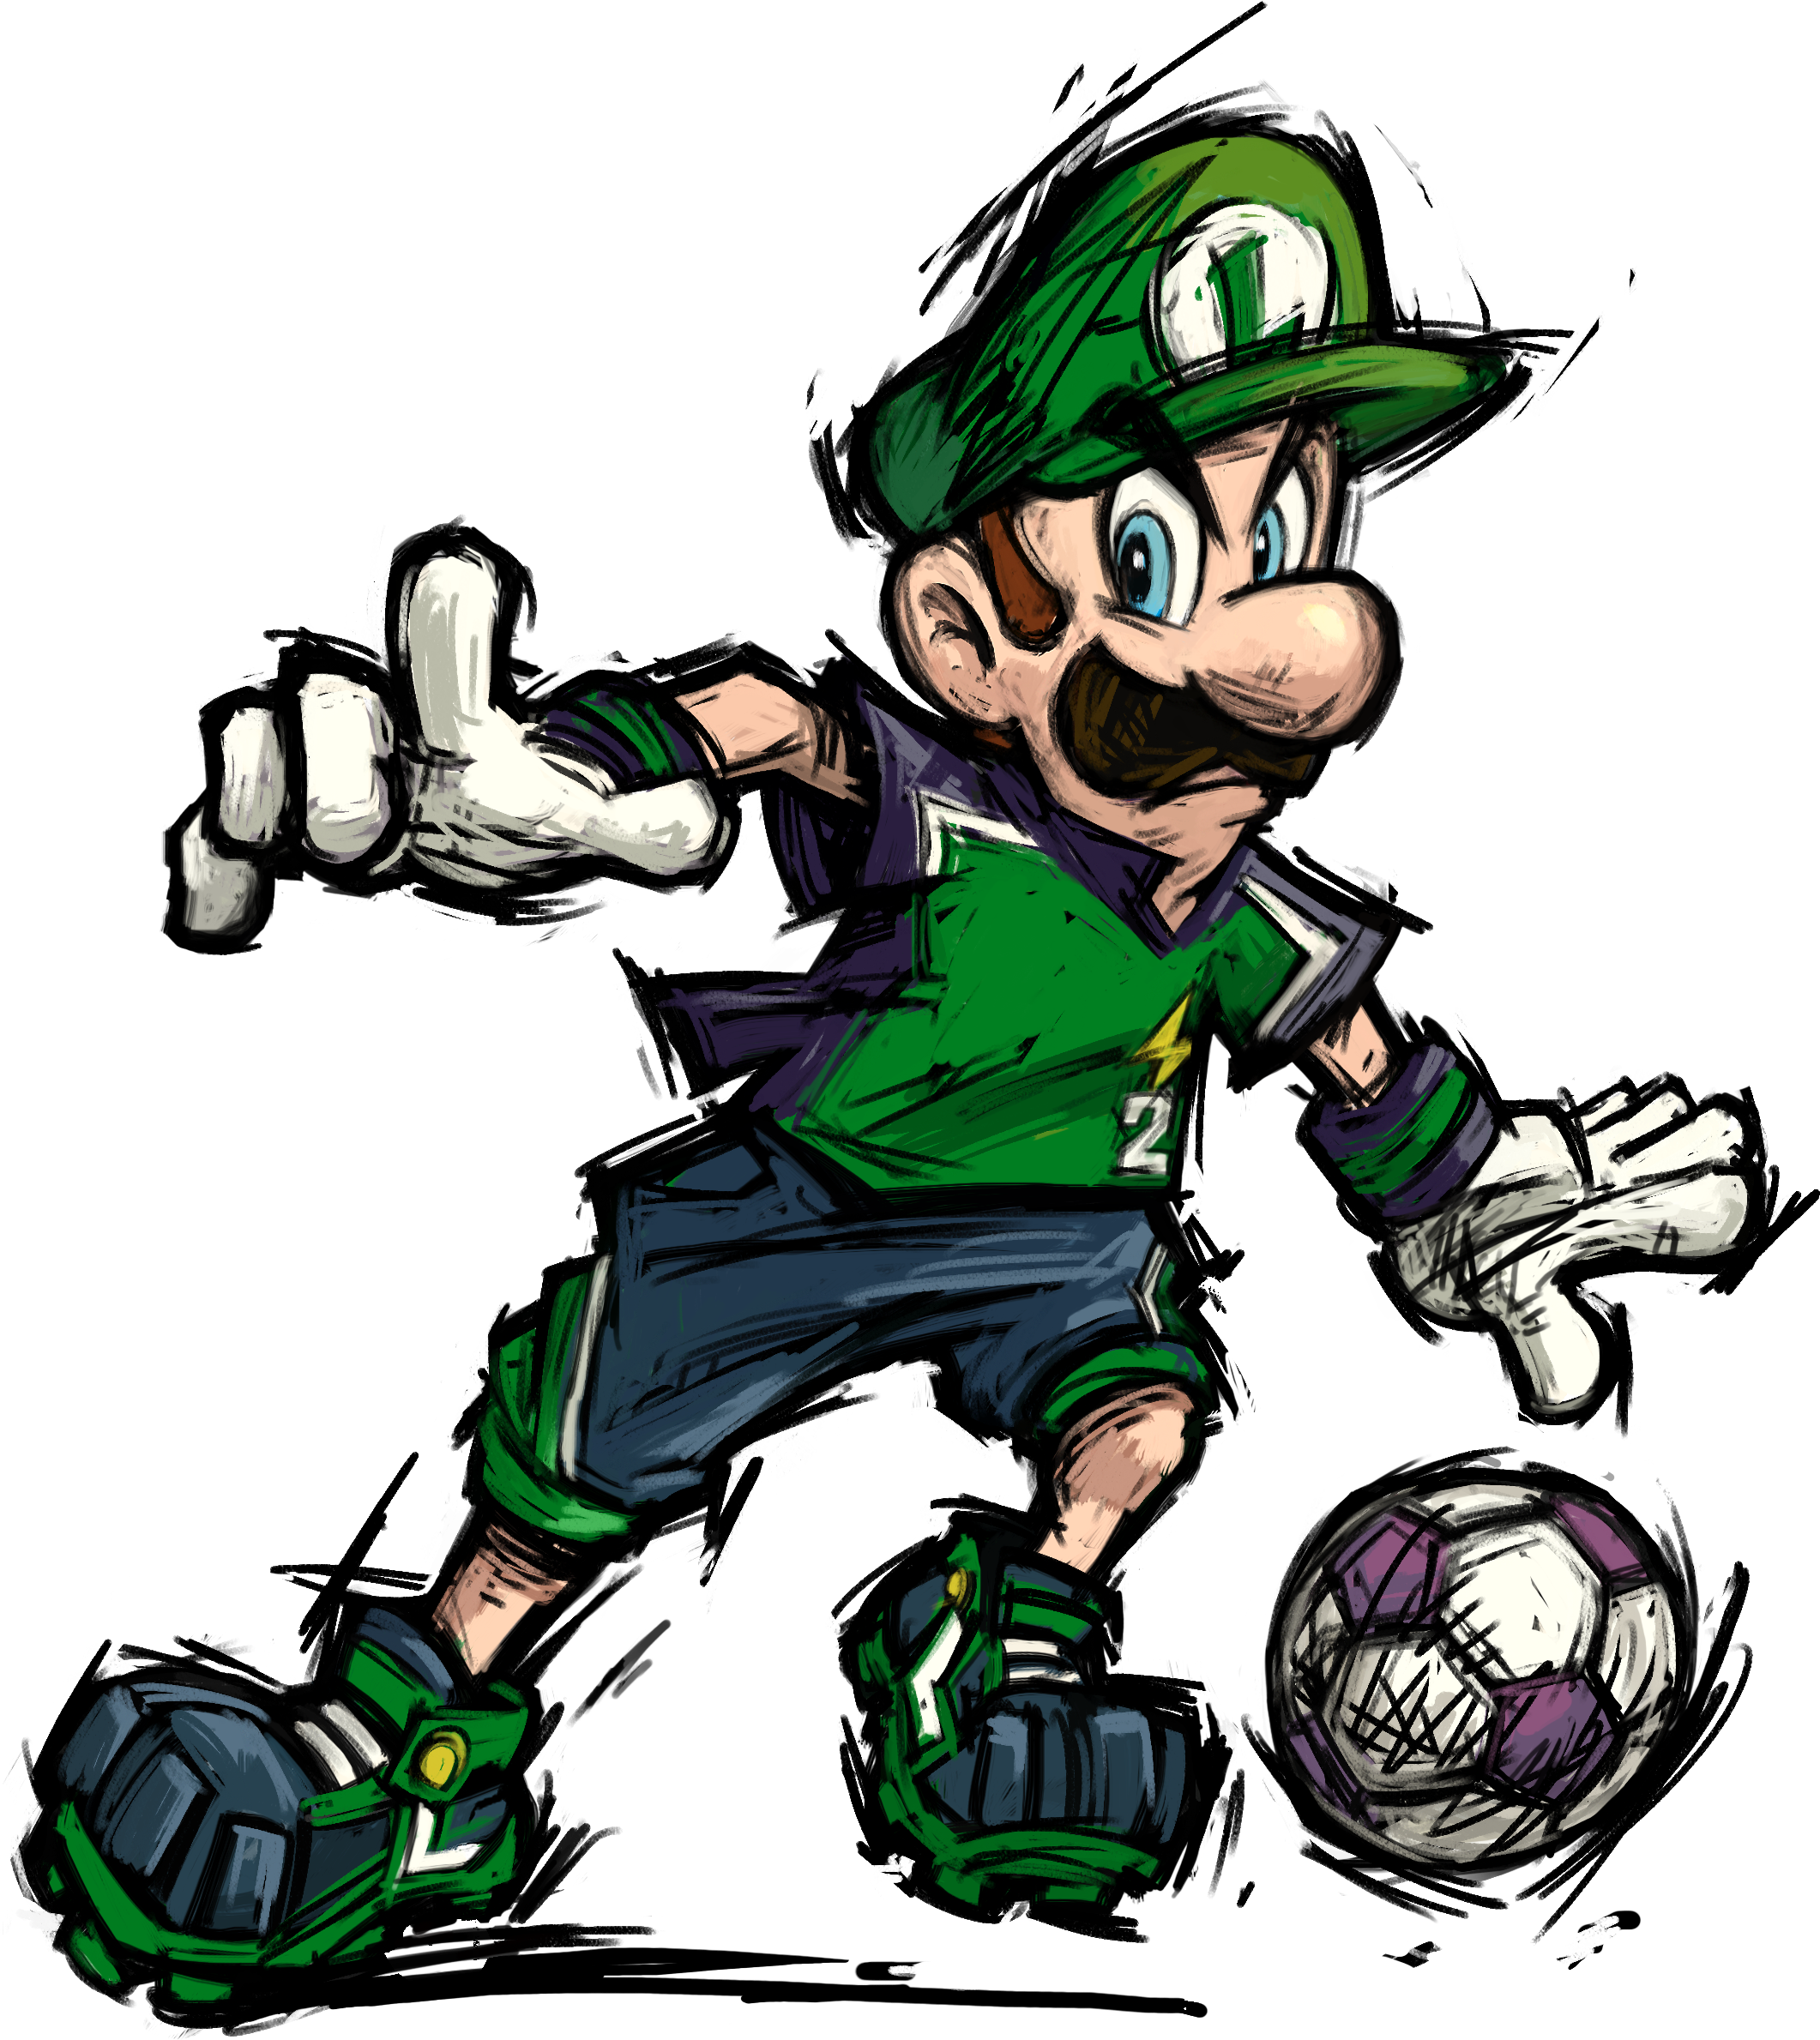 Mario Strikers Charged - Super Mario Strikers Characters (2122x2379)